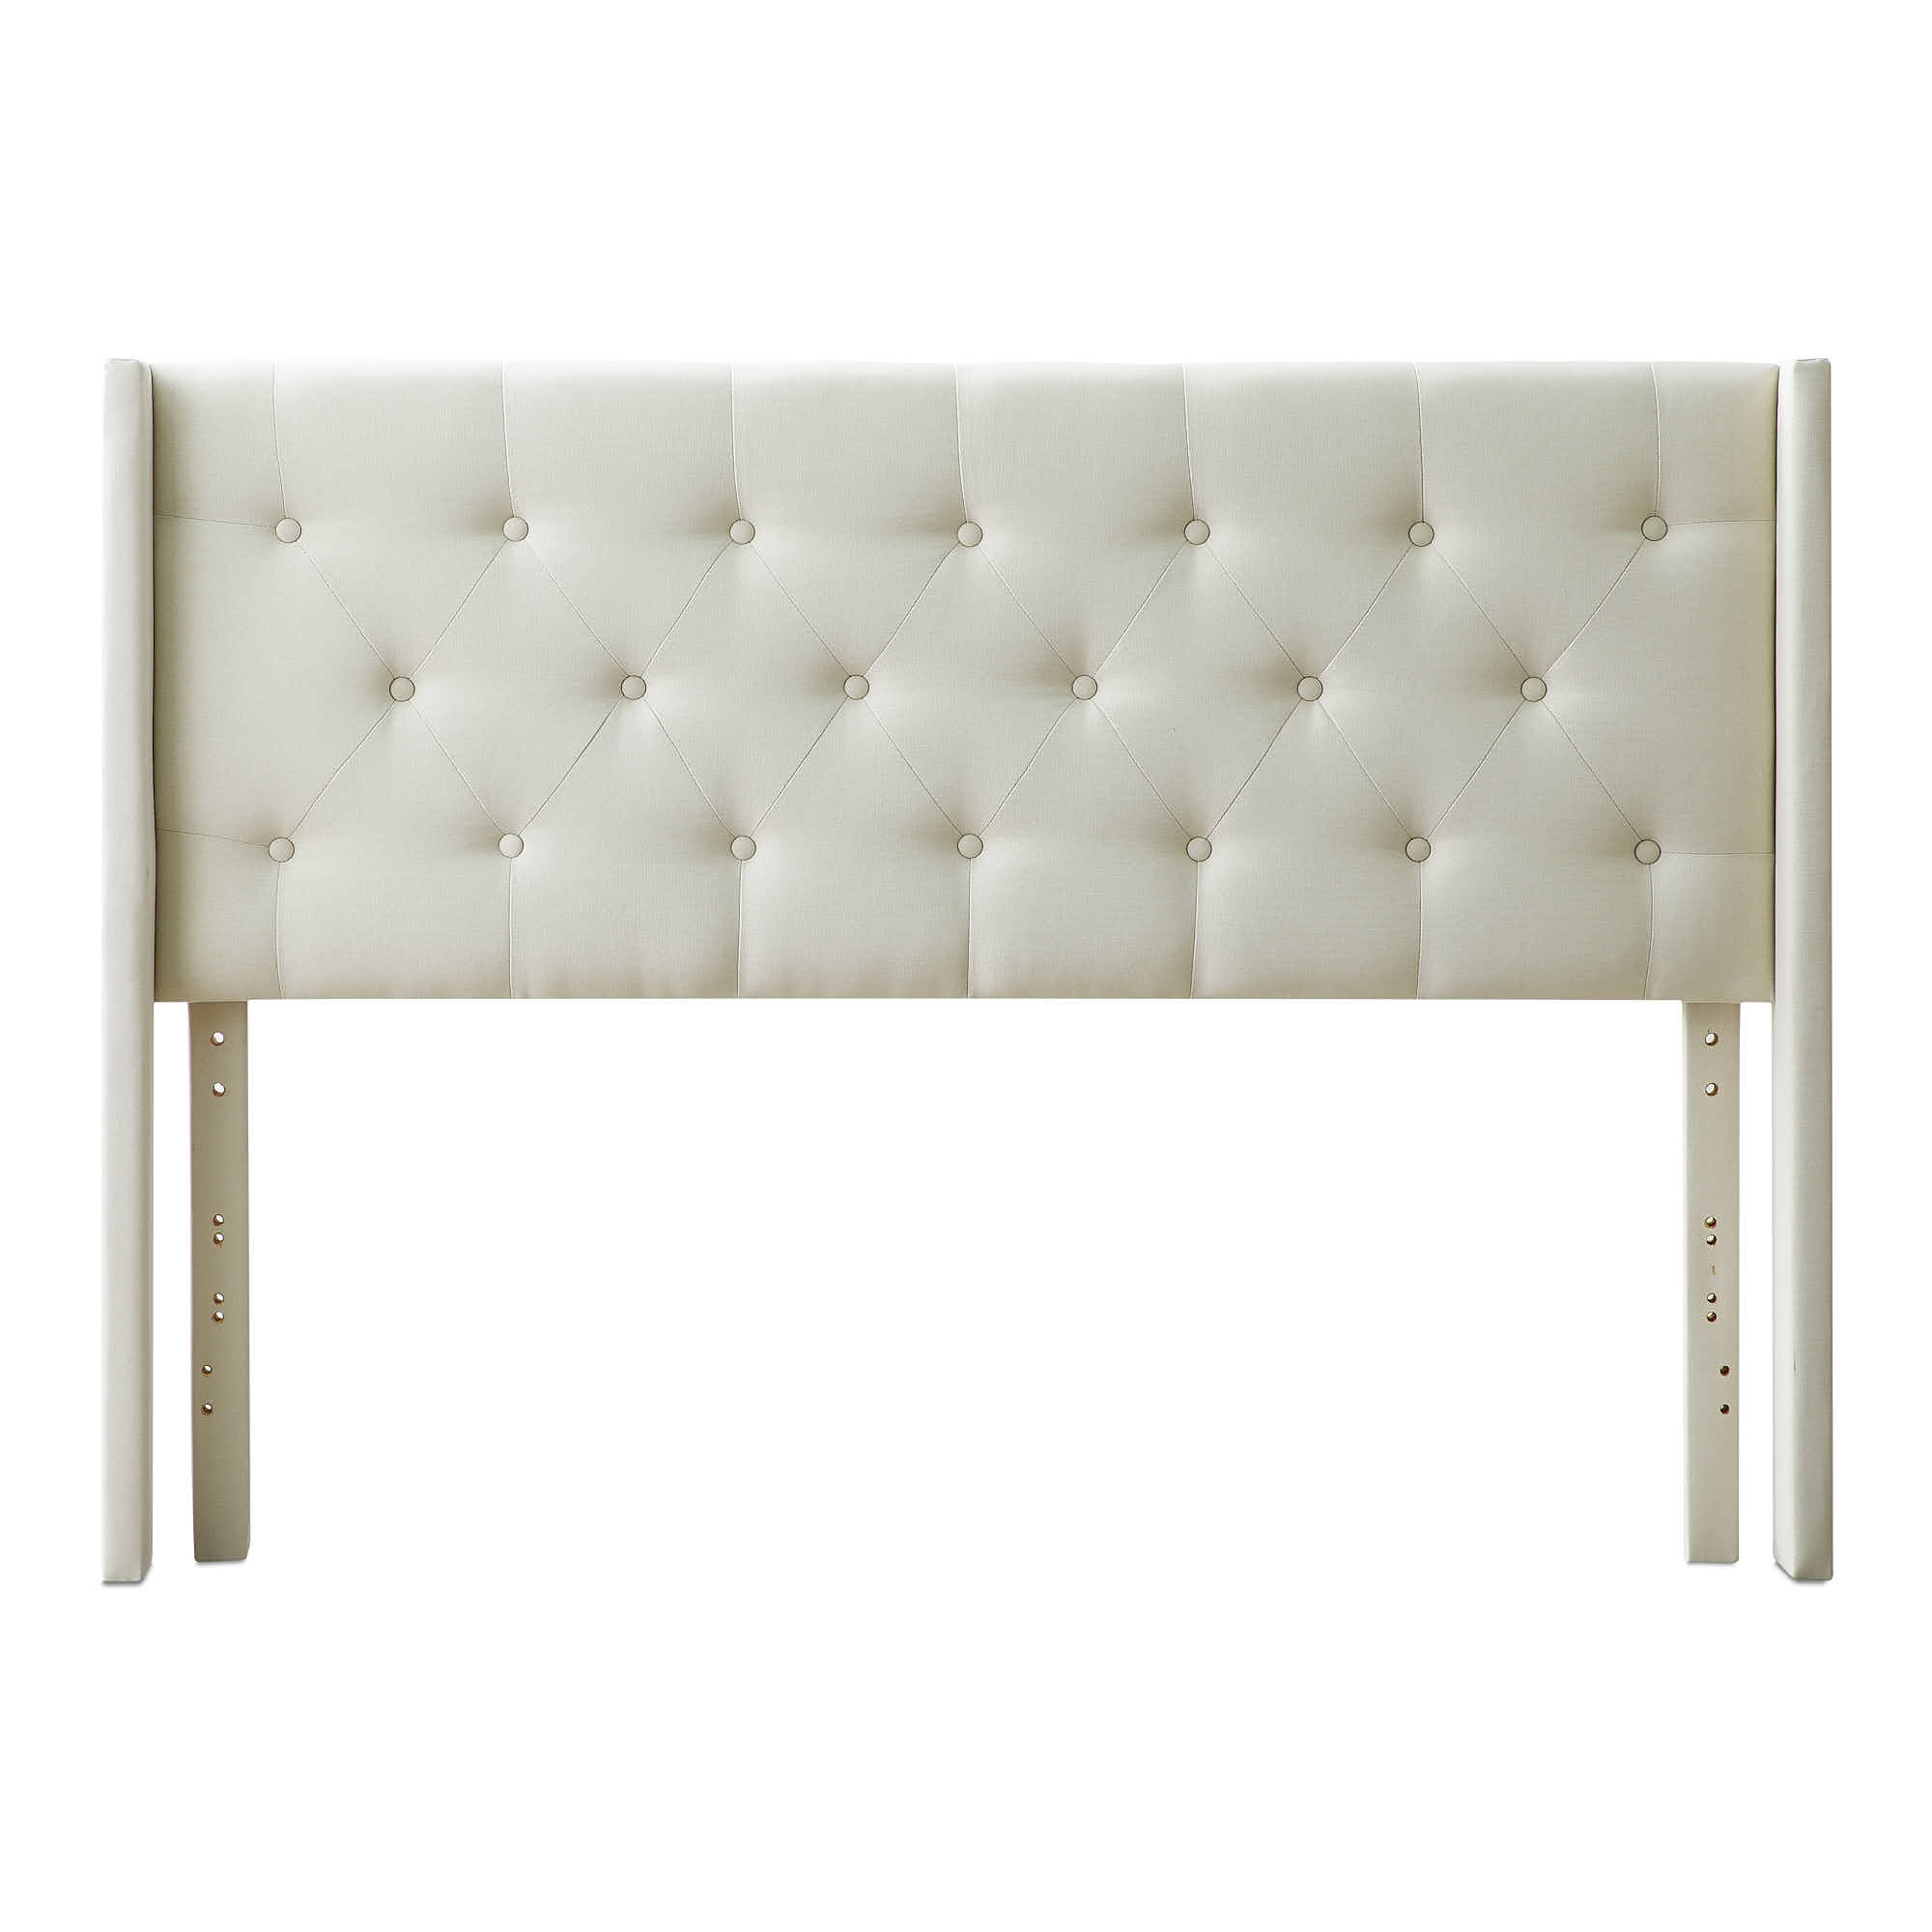 Rest Haven Button Tufted Upholstered Headboard, Queen, Cream - image 4 of 9